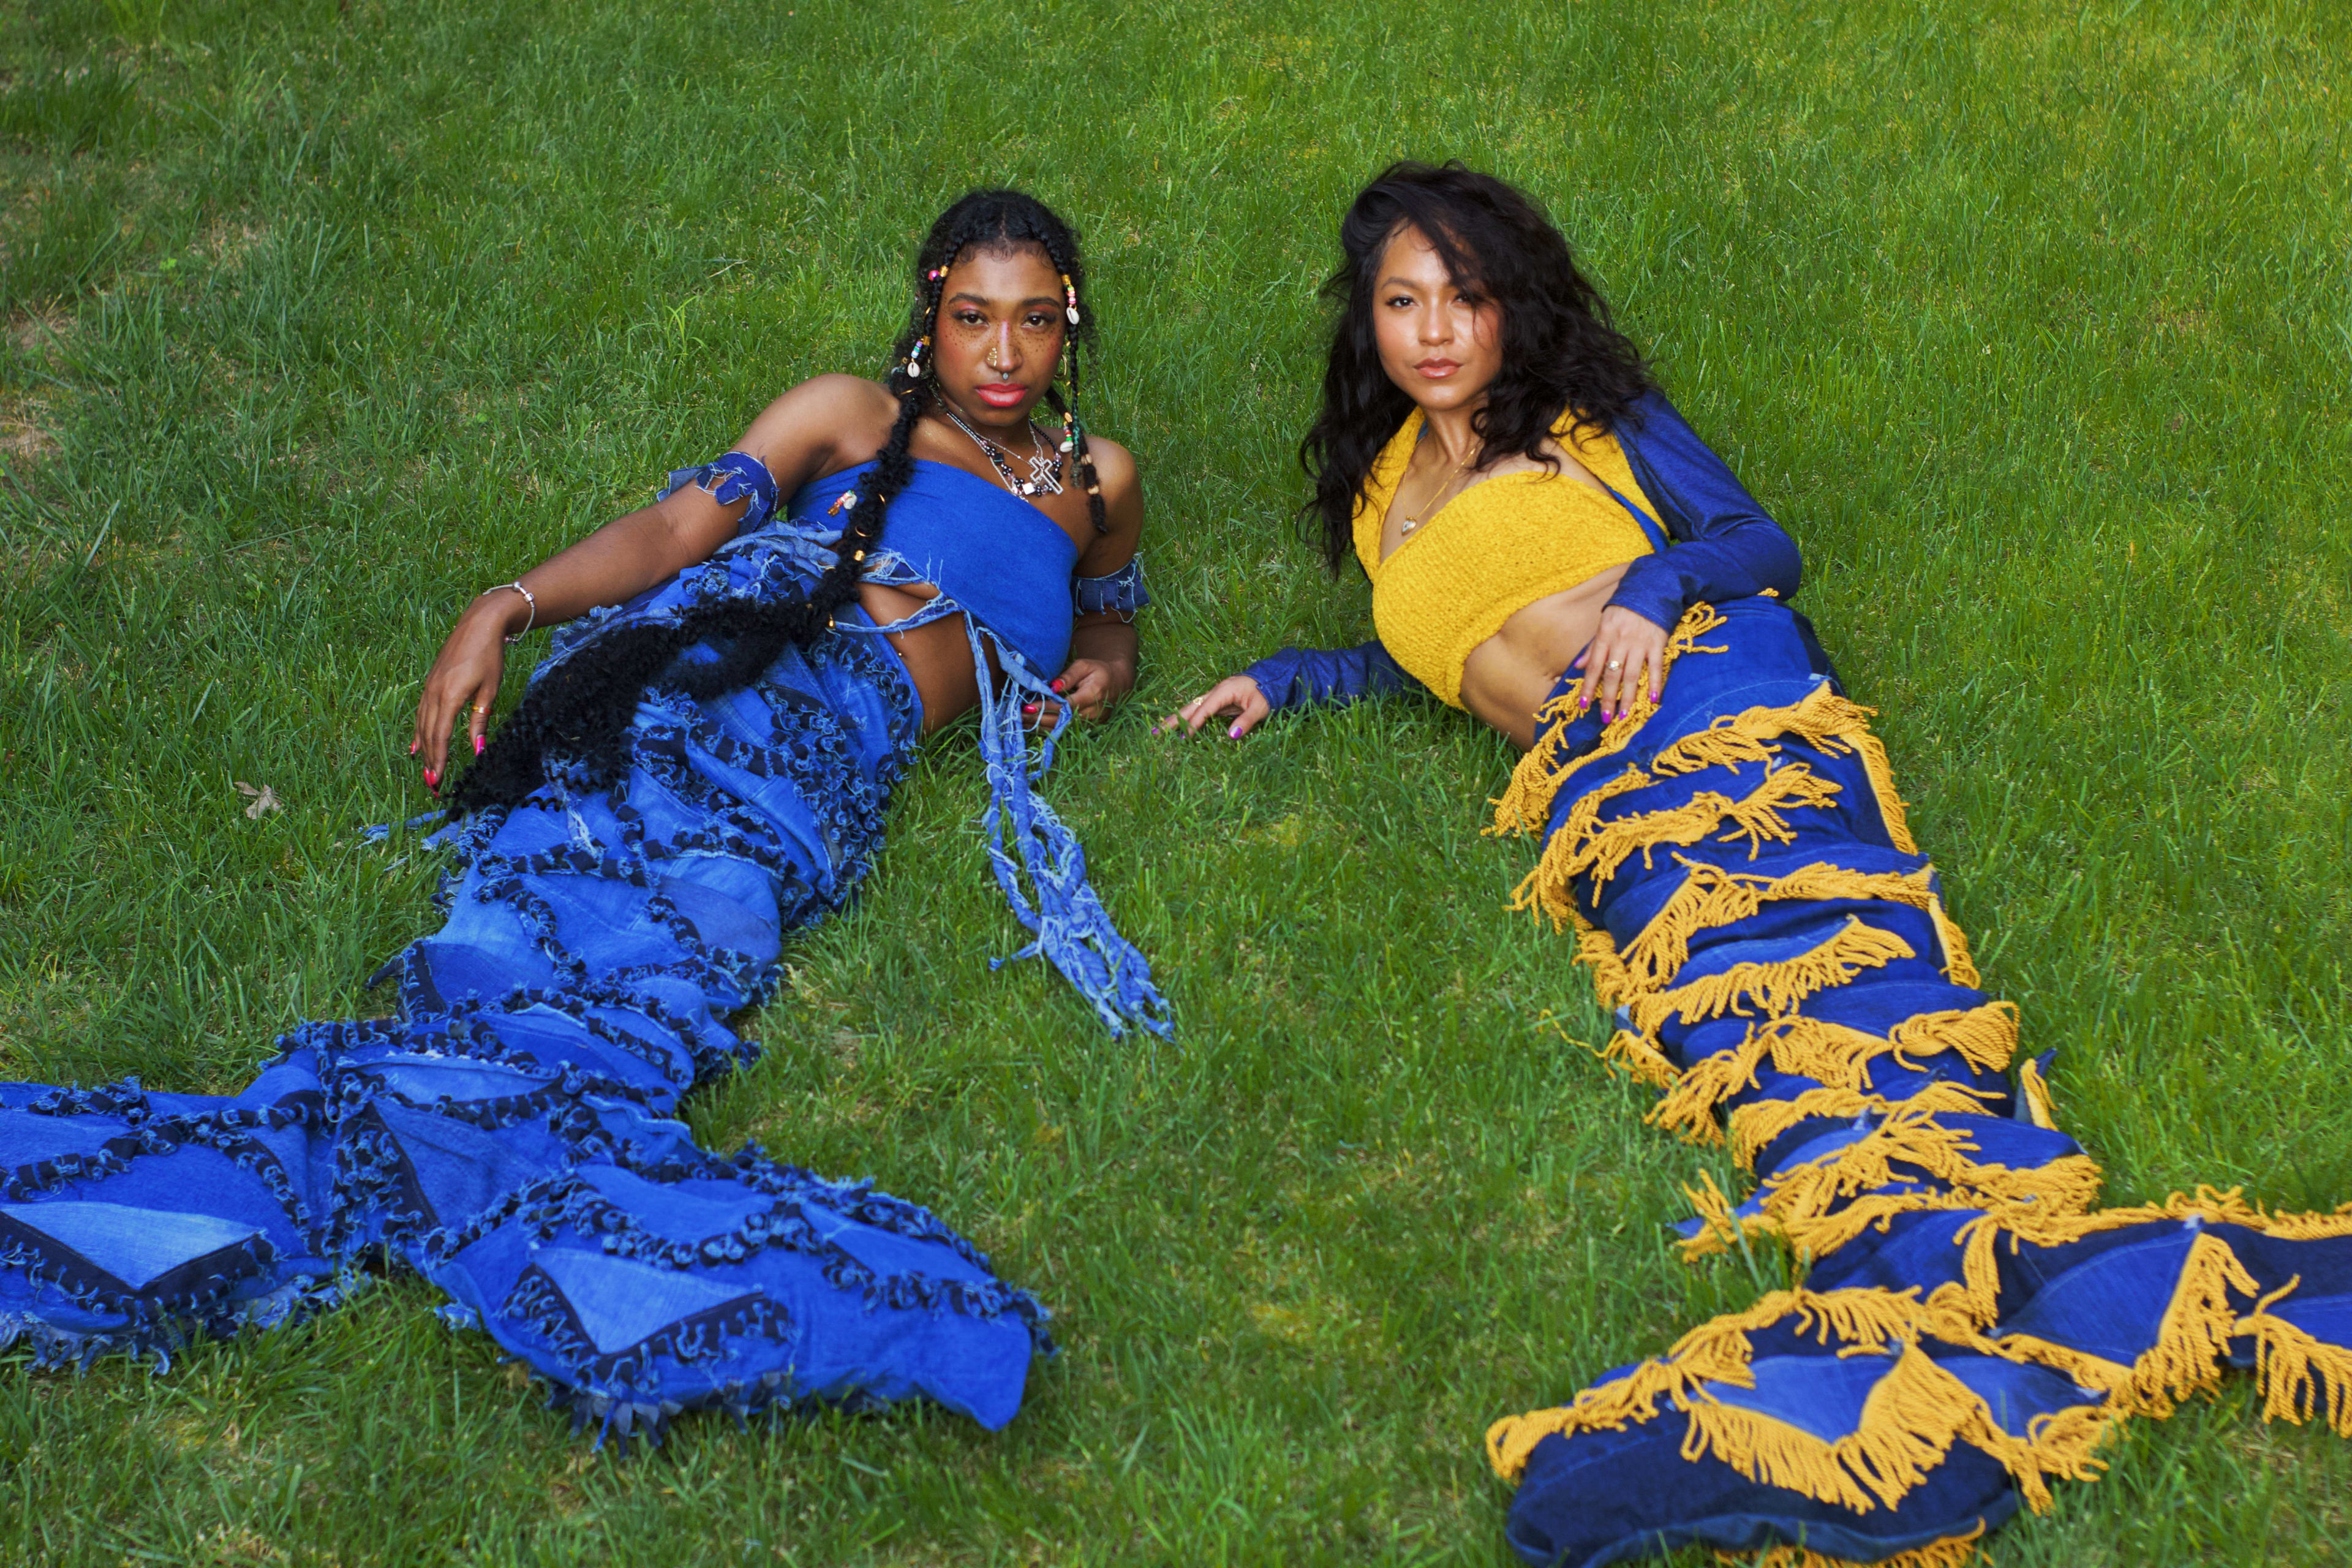 Two women in mermaid costumes in a green outdoor garden laying on the grass next to each other.